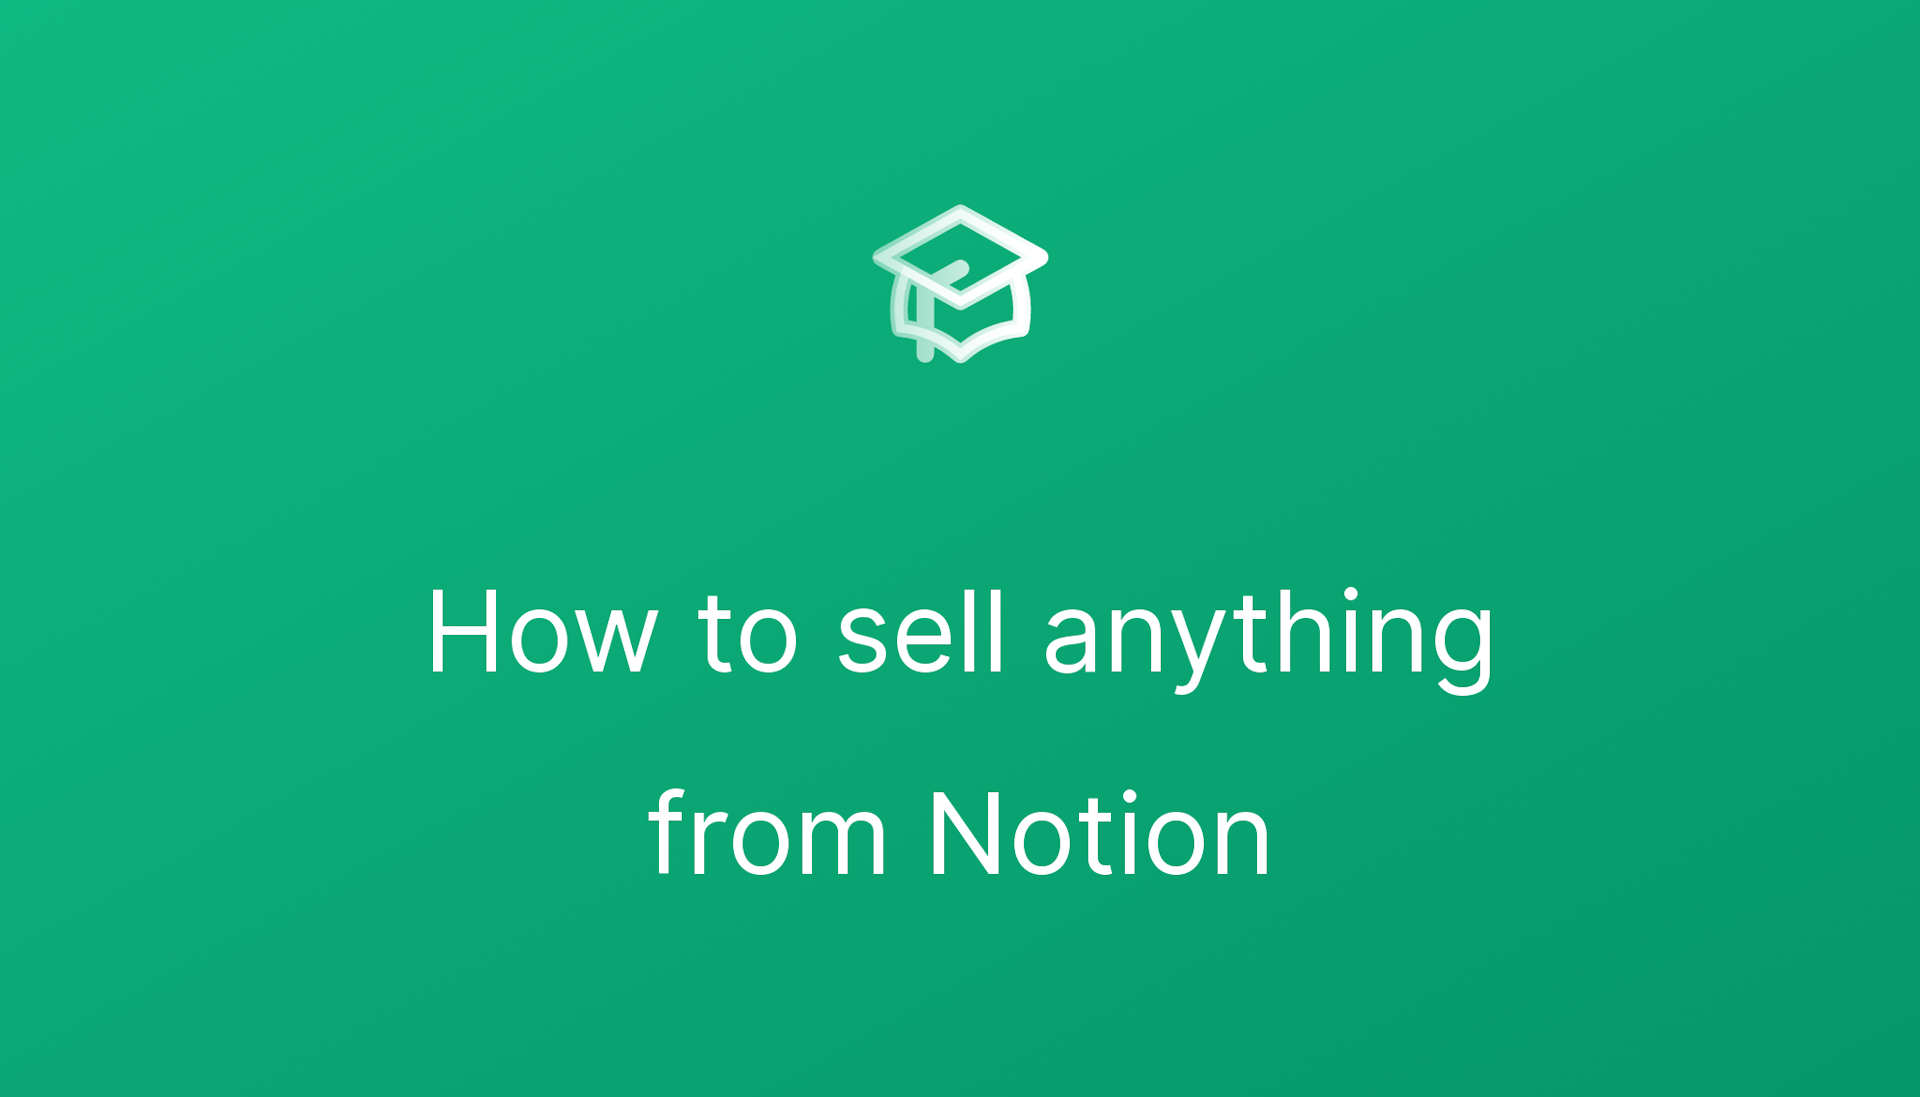 How to sell anything from Notion